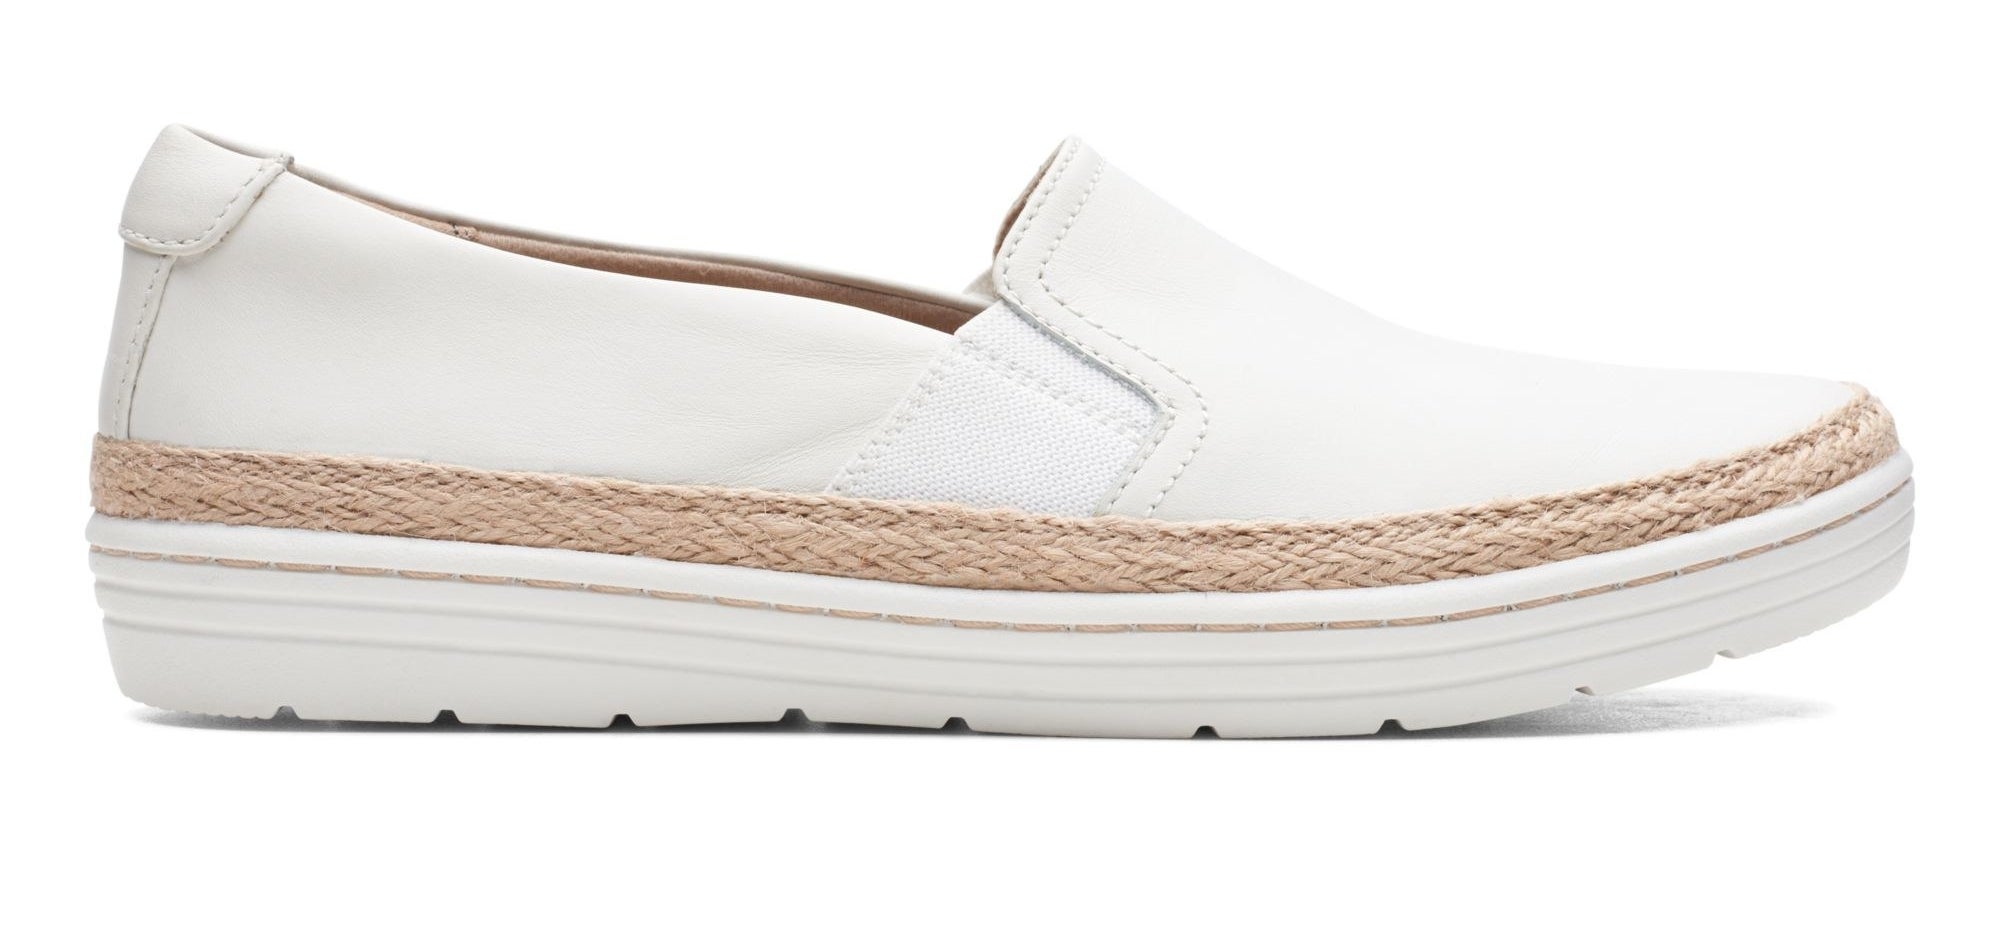 Make Room In Your Closet, Clarks Is Having A 40% Off Summer Sale